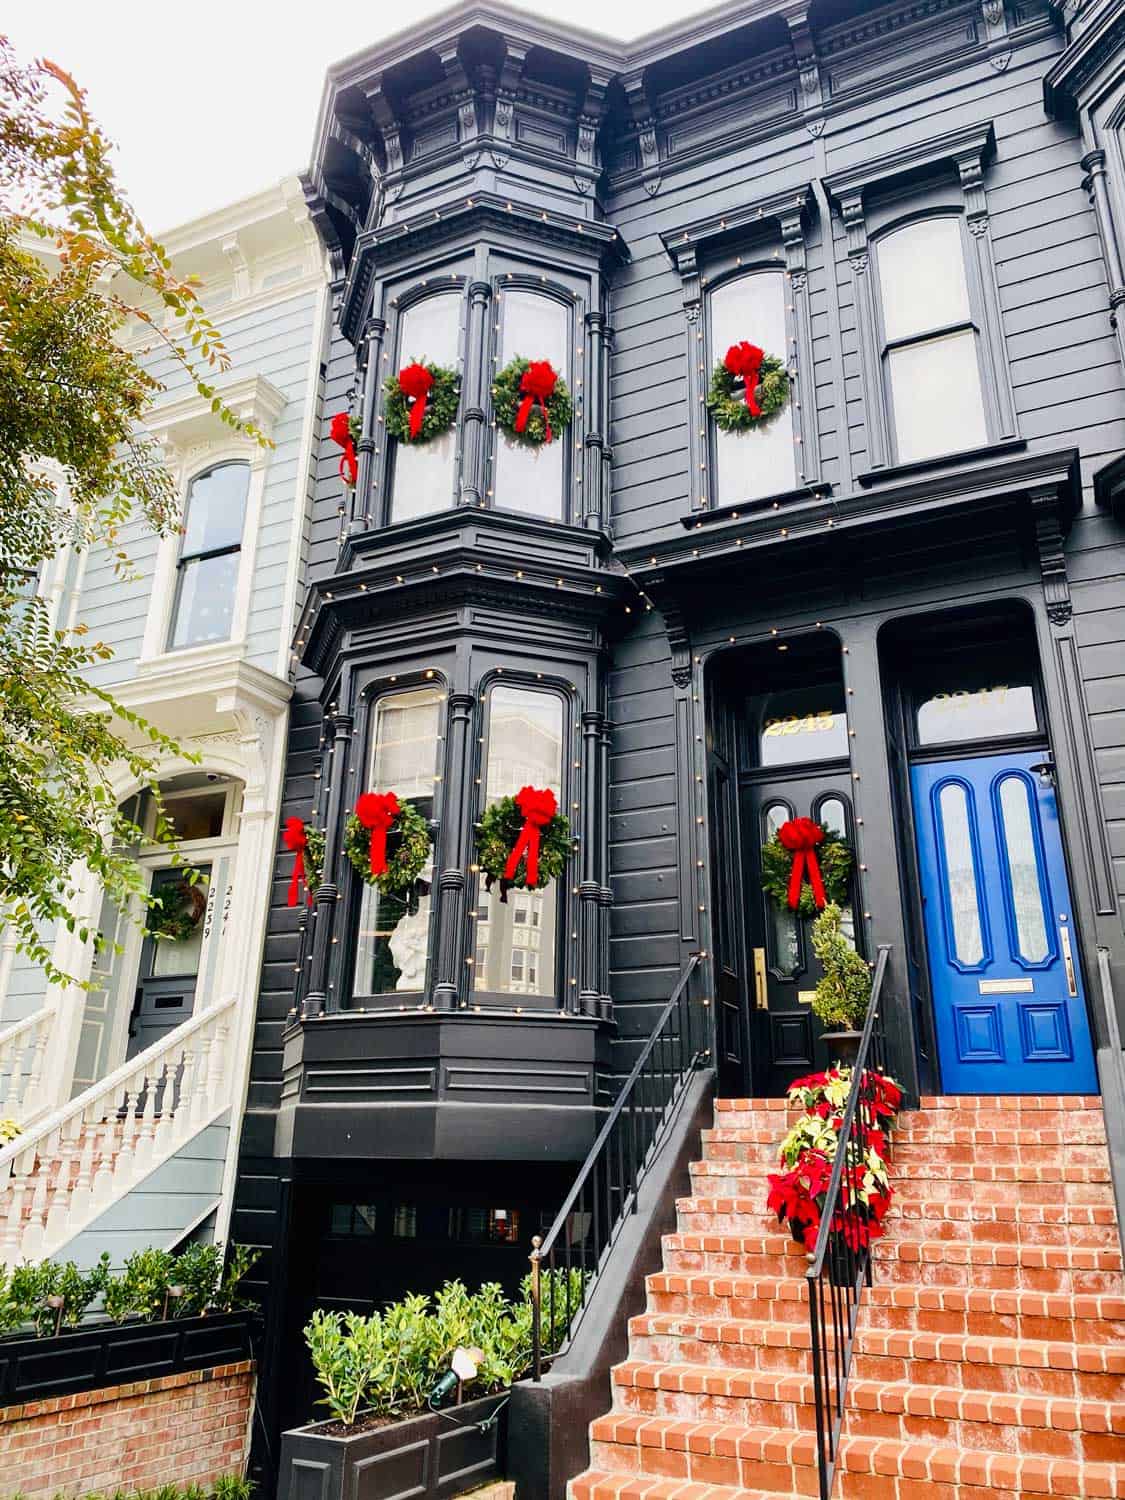 Black Victorian Home with Christmas Wreaths